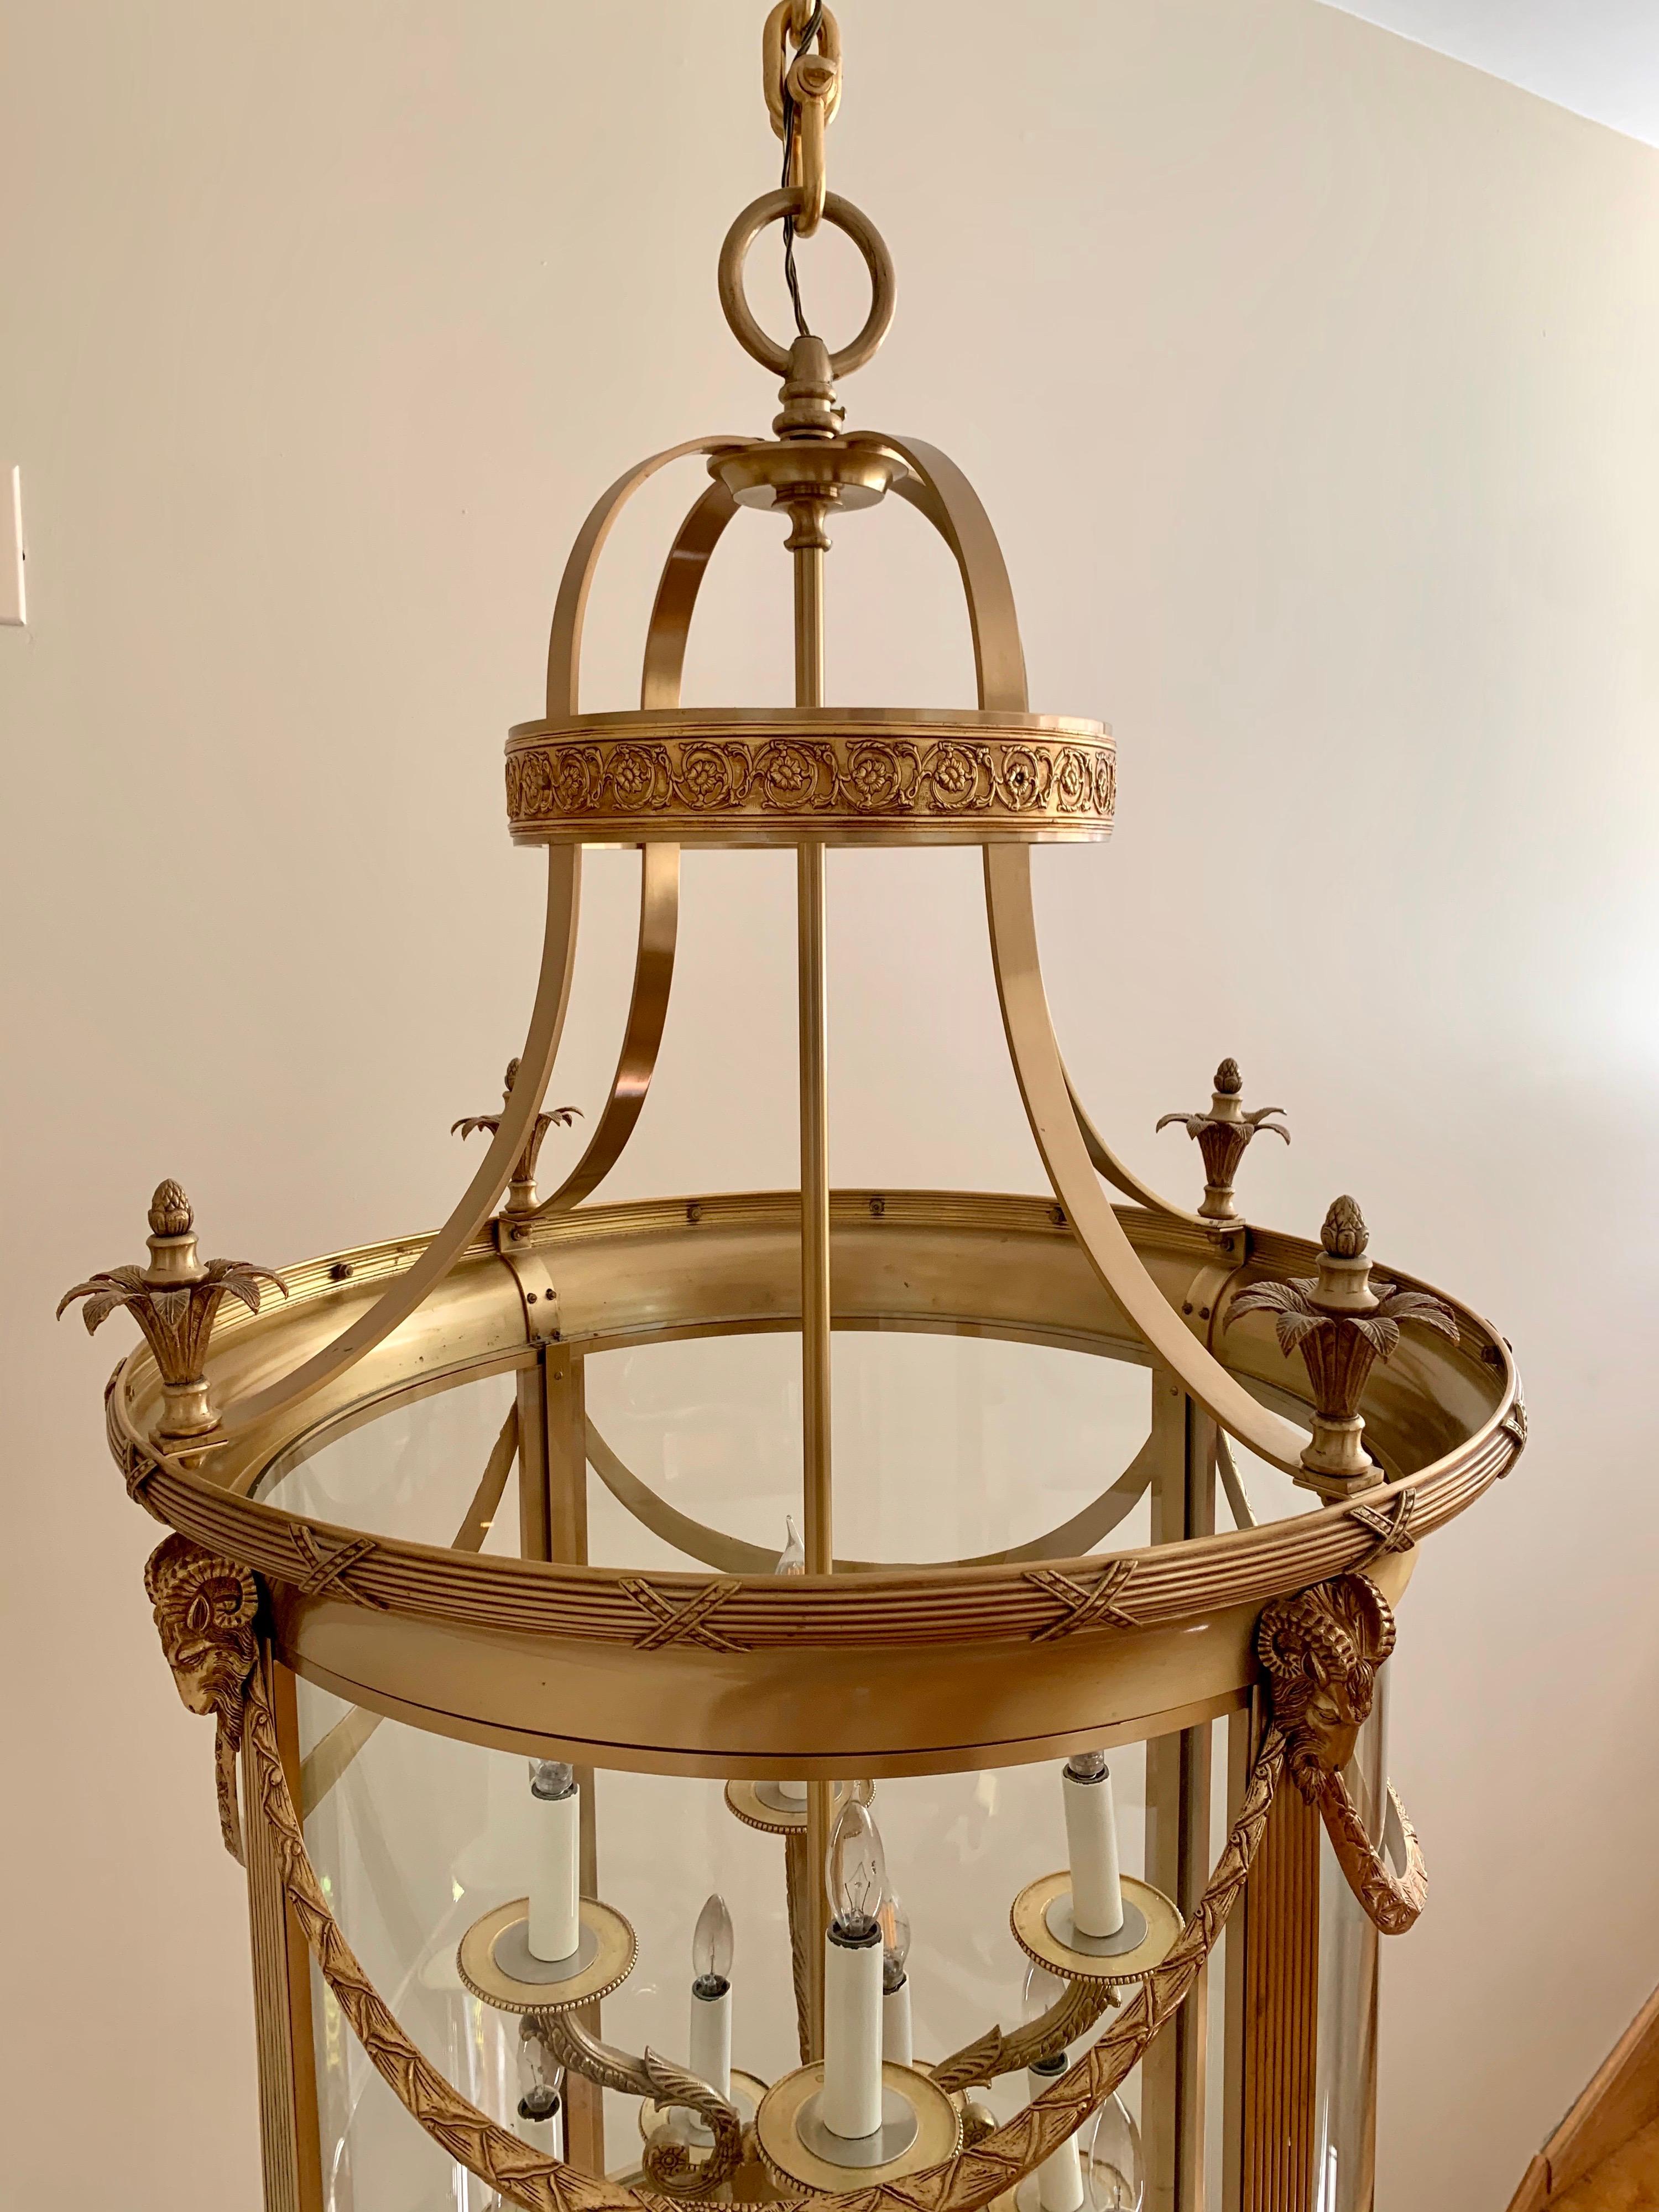 Large cylindrical 12-light brass chandelier features ornate swags and floral detail accented with ram heads. Can be hung in a two story foyer or staircase. Features a thick brass adjustable chain. This is a large piece that is 54